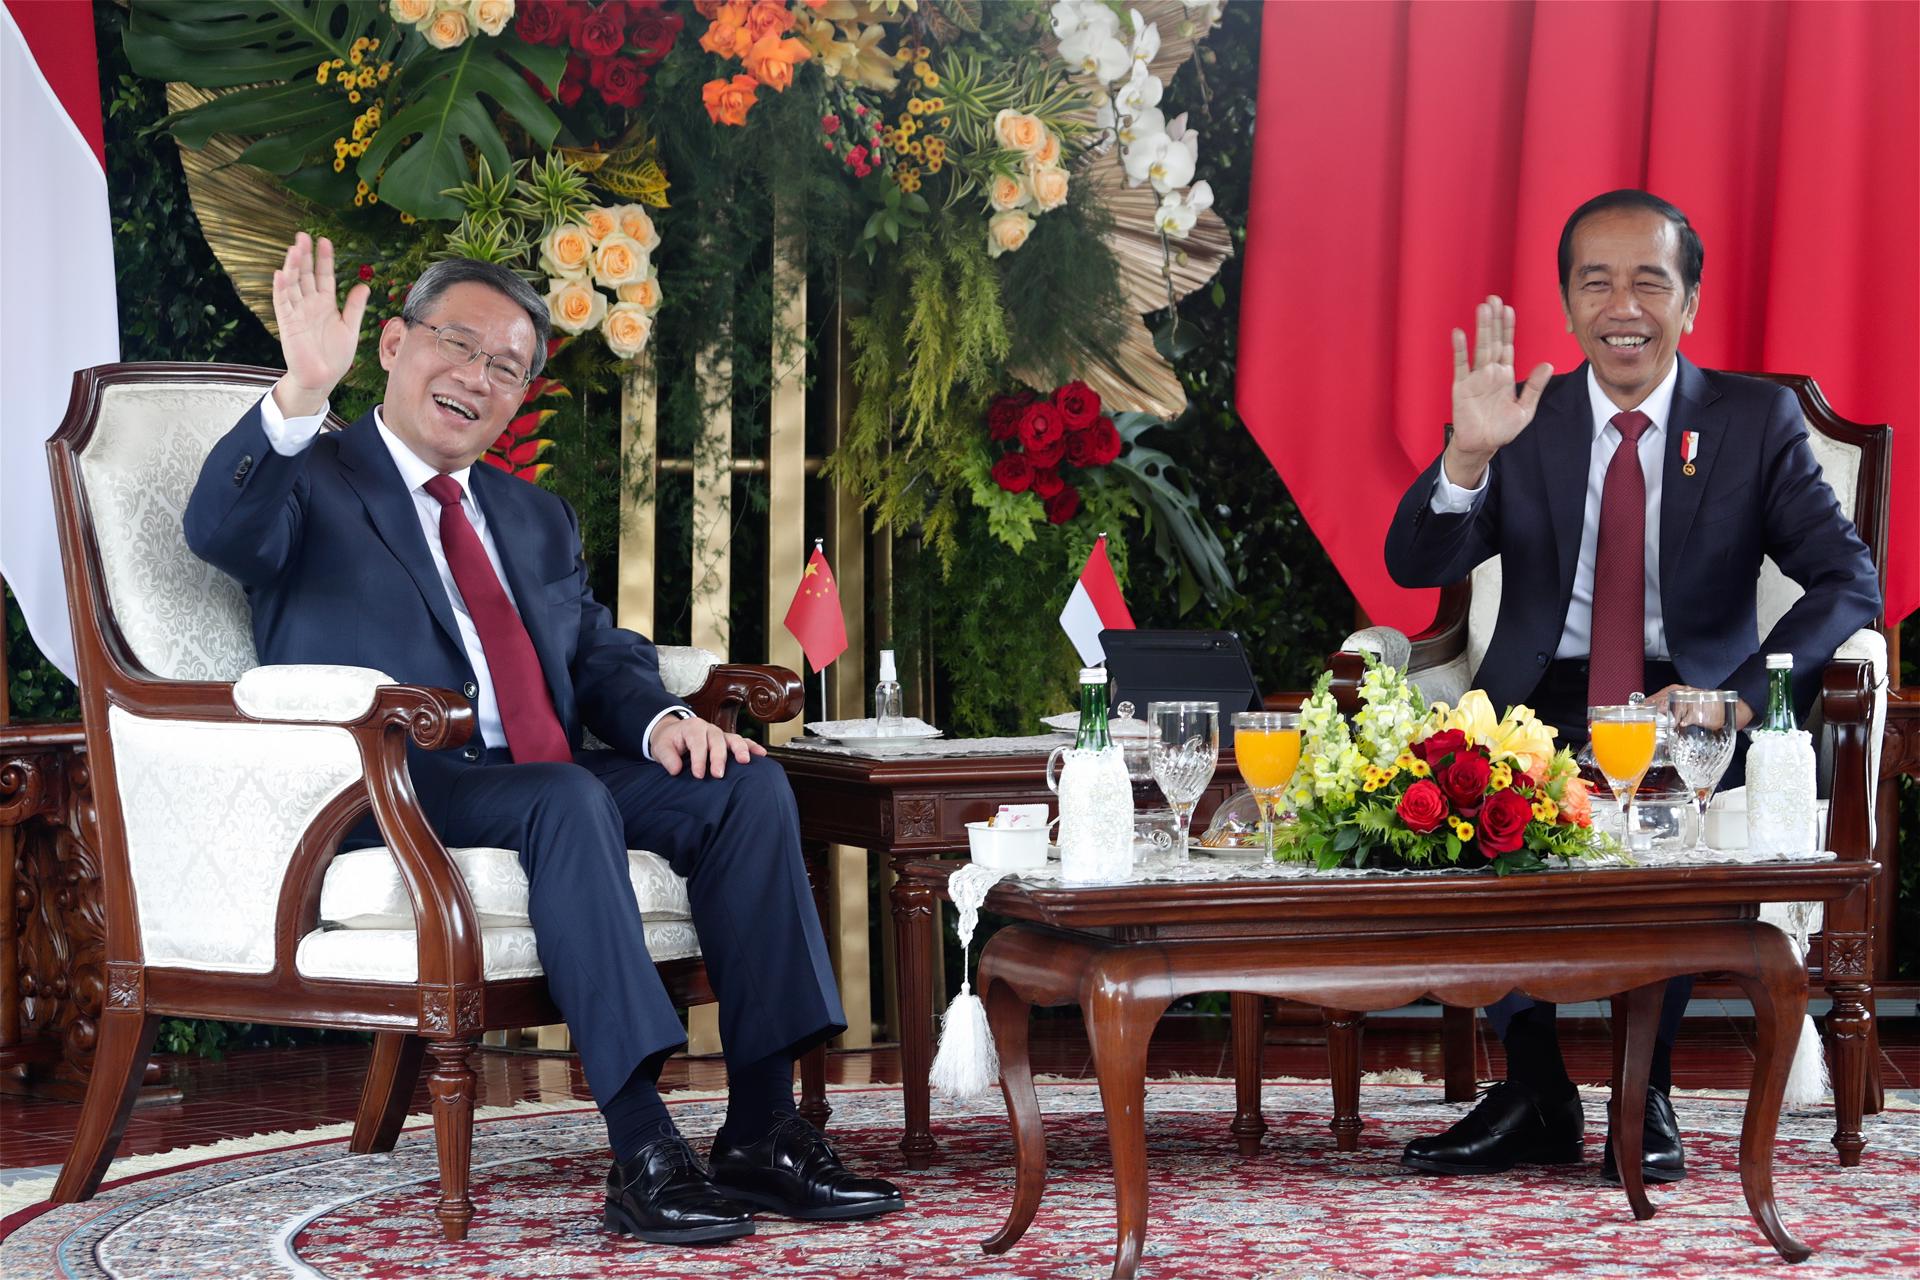 China's Premier Li Qiang (L) and Indonesian President Joko Widodo (R) wave to journalists during their meeting at the Presidential Palace in Jakarta, Indonesia, 08 September 2023. EFE/EPA/ADI WEDA